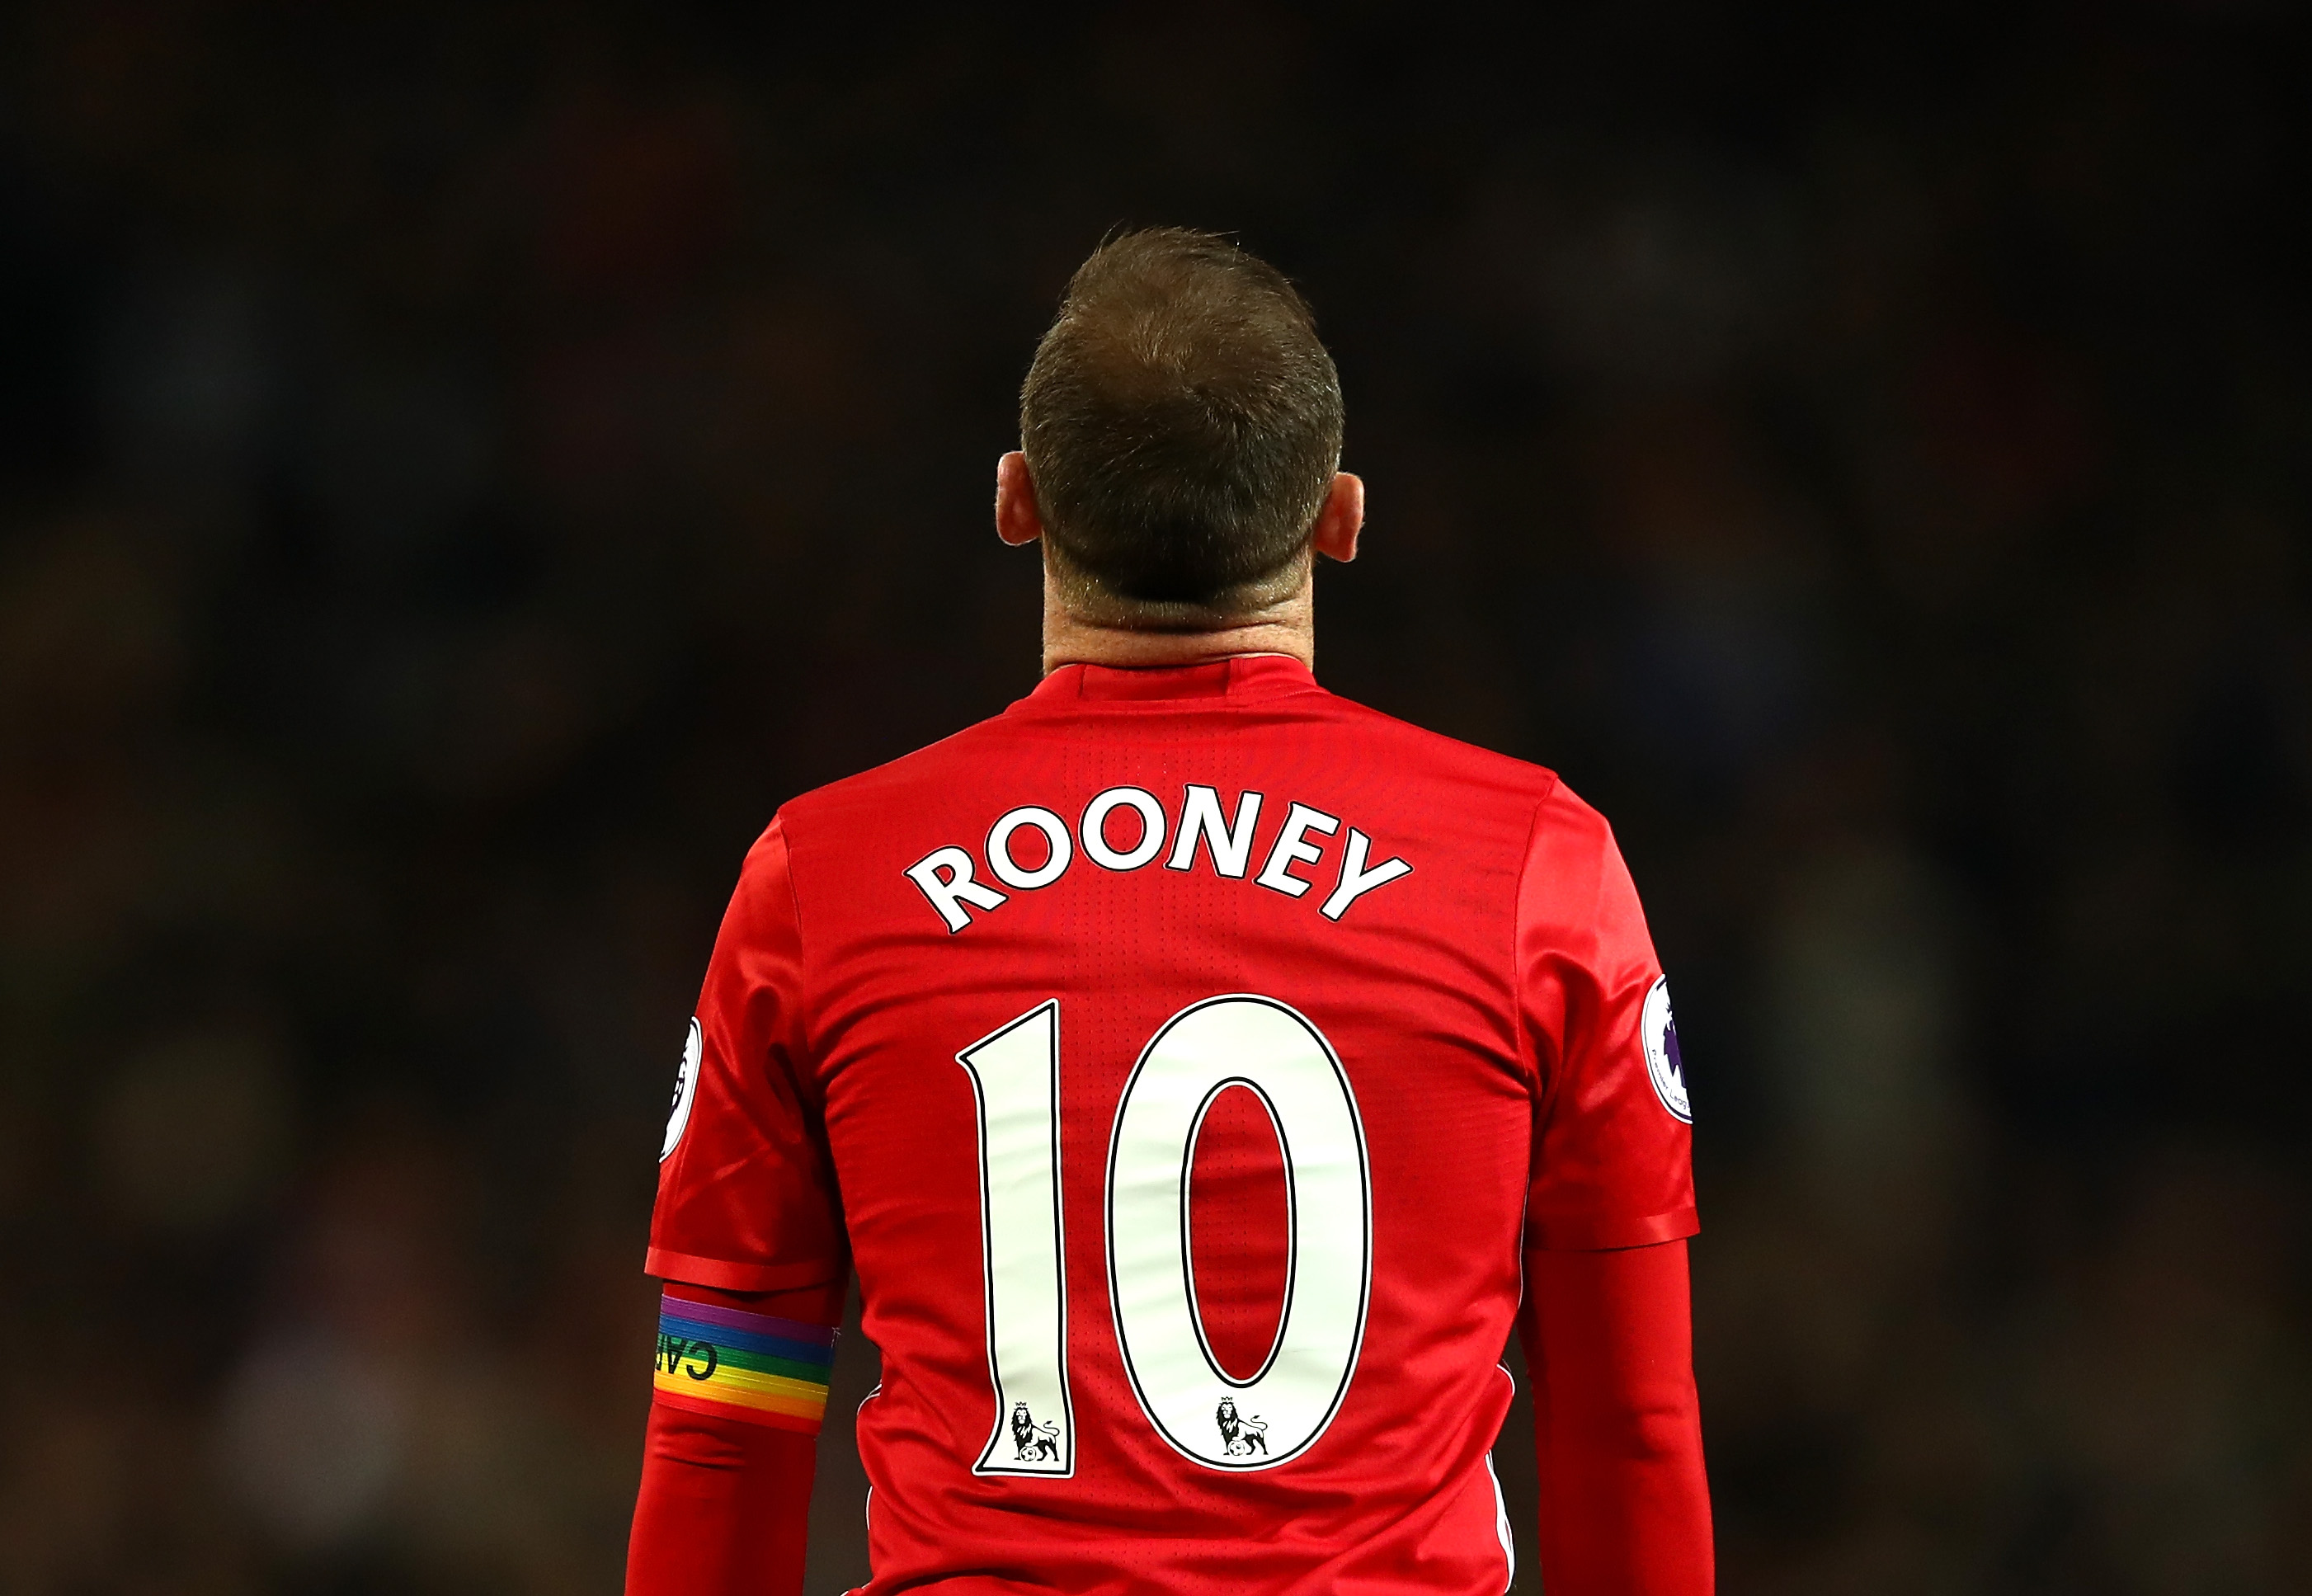 MANCHESTER, ENGLAND - NOVEMBER 27:  Wayne Rooney of Manchester United during the Premier League match between Manchester United and West Ham United at Old Trafford on November 27, 2016 in Manchester, England.  (Photo by Clive Brunskill/Getty Images)